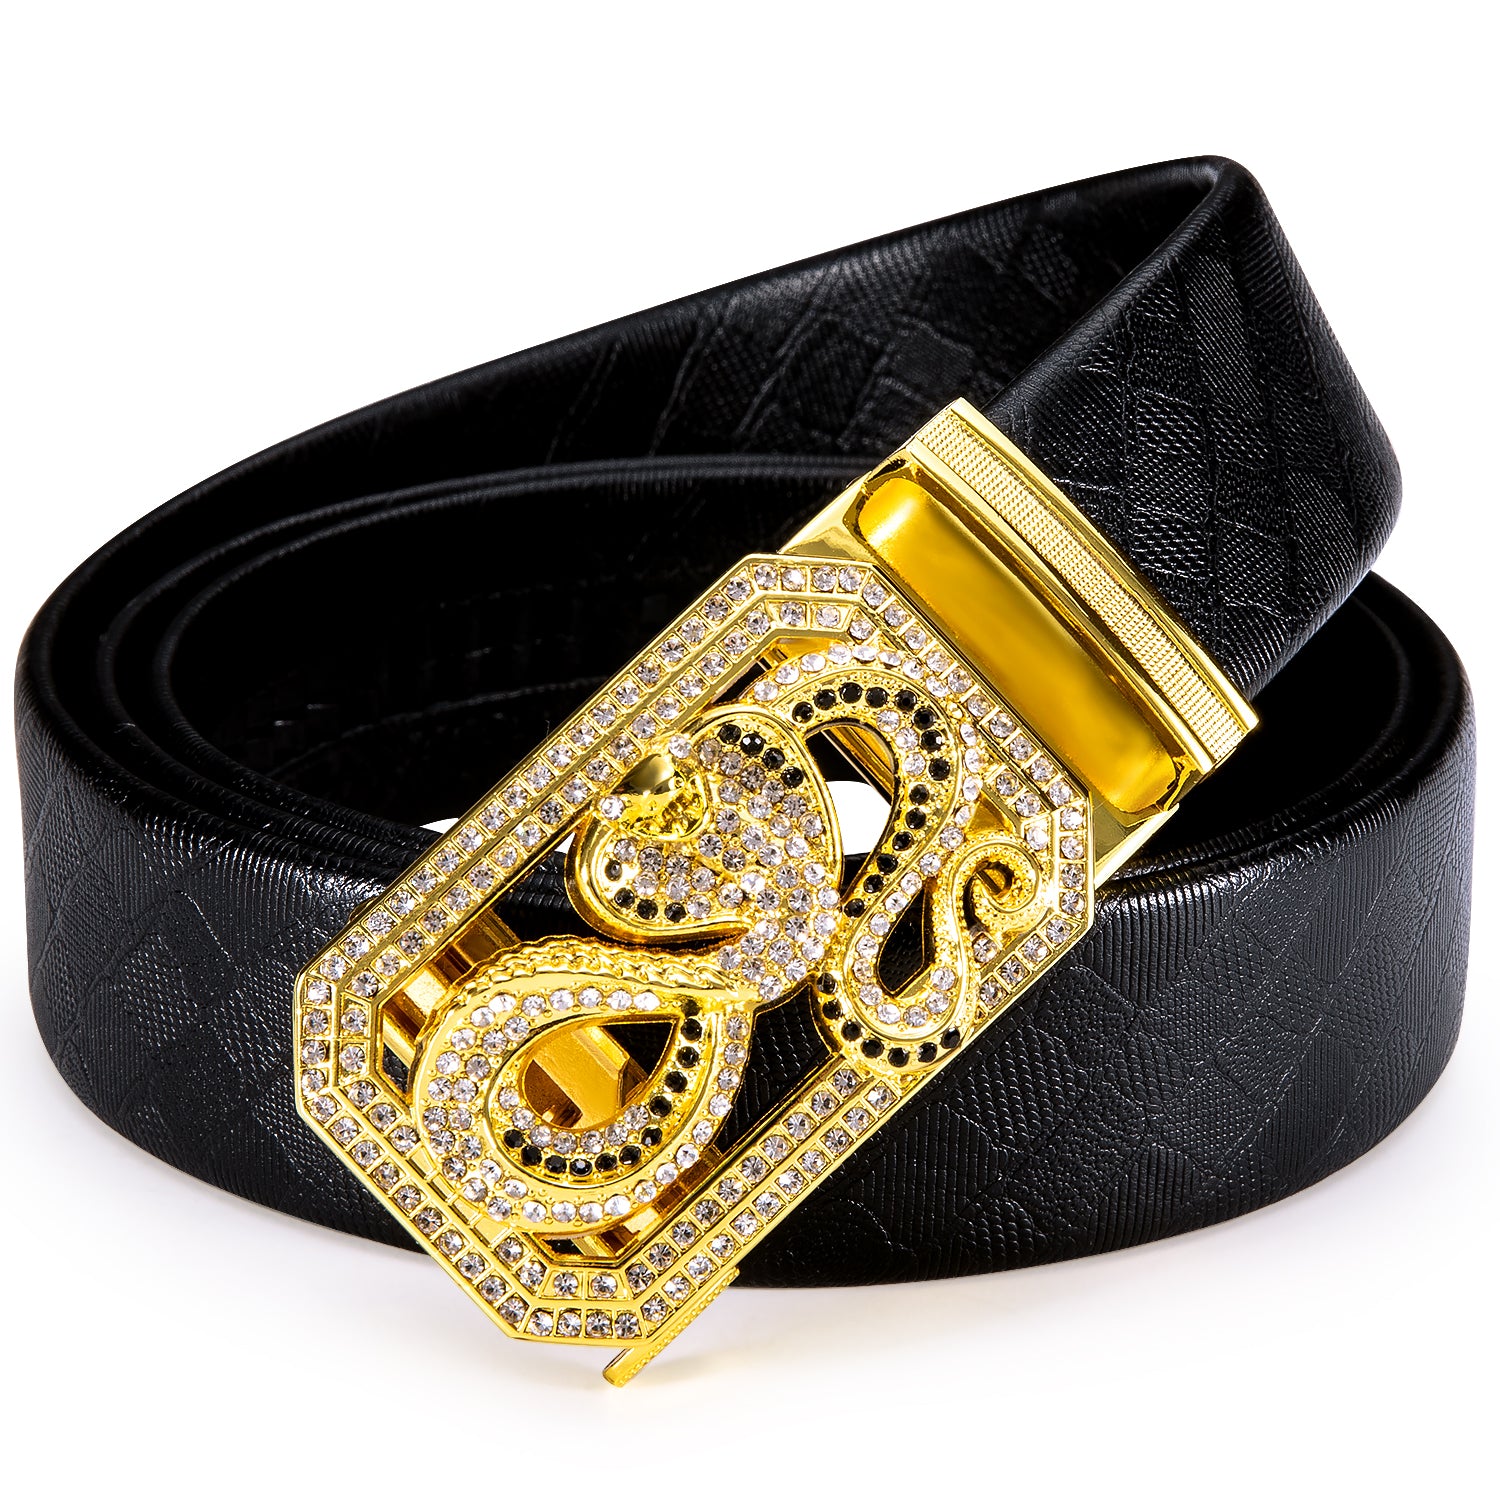 Golden Diamond Metal Automatic Buckle Black Leather Belt 43 inch to 63 inch